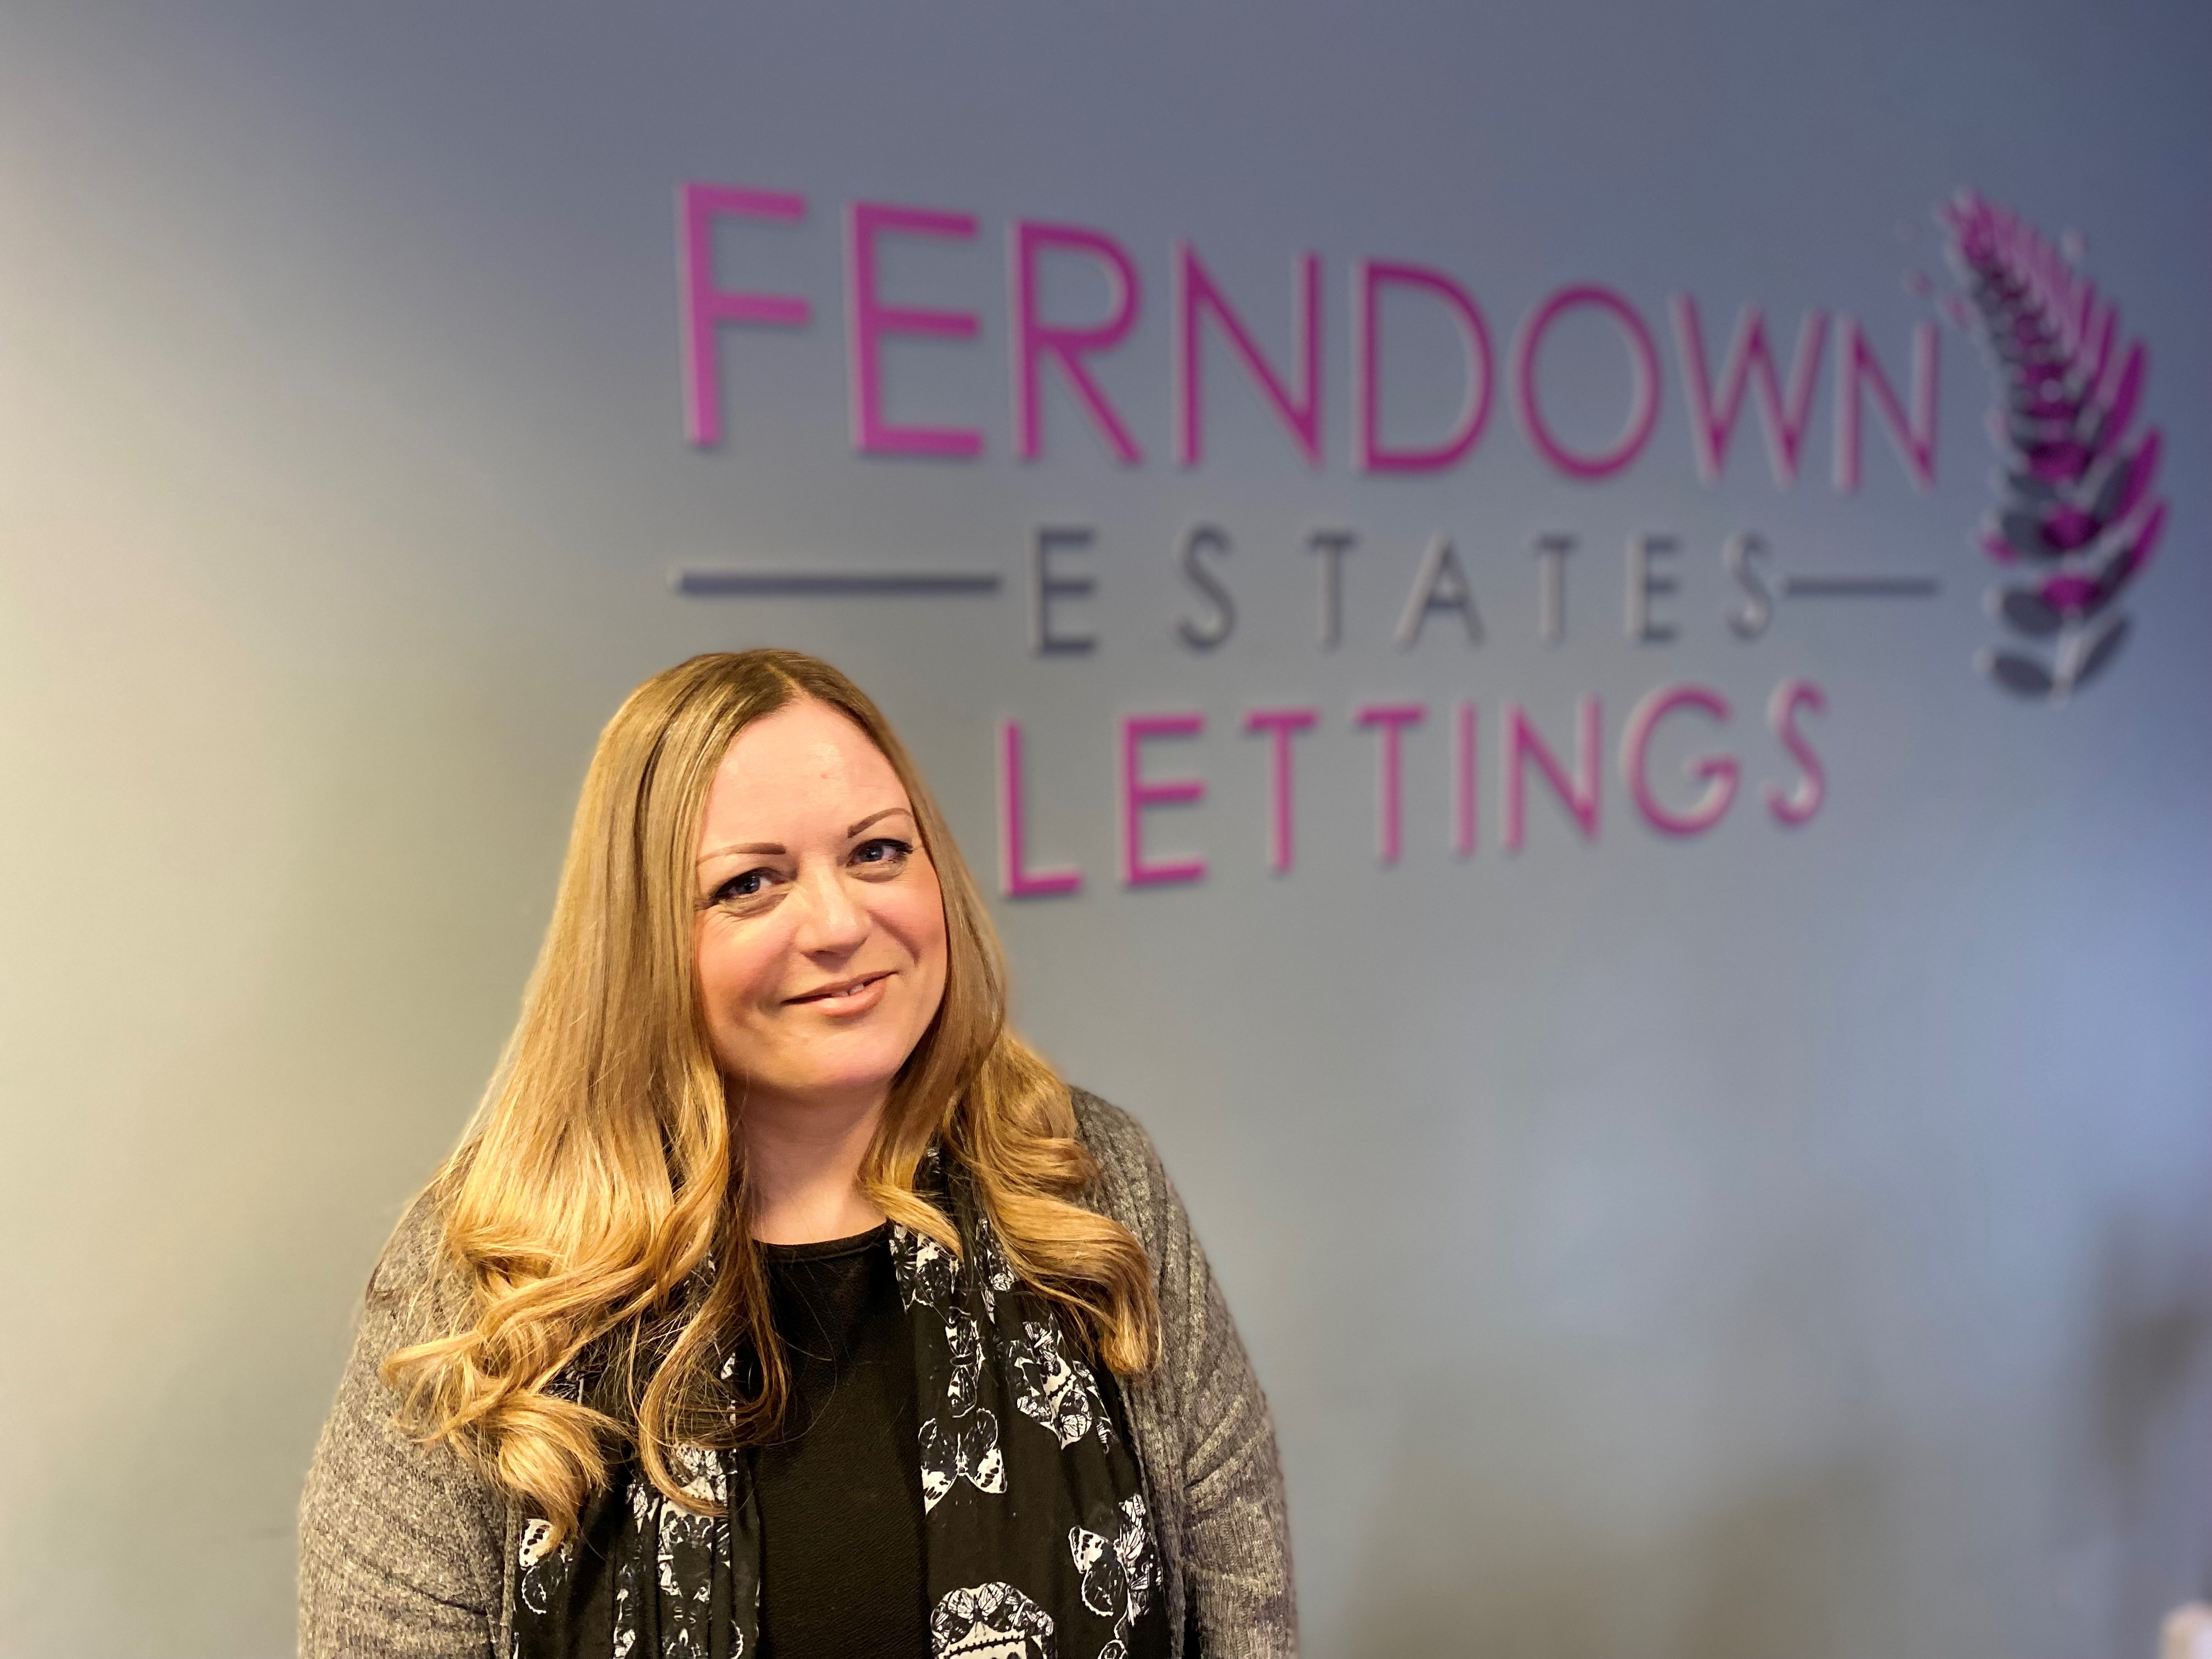 Sharon Campbell, Assistant Lettings Manager